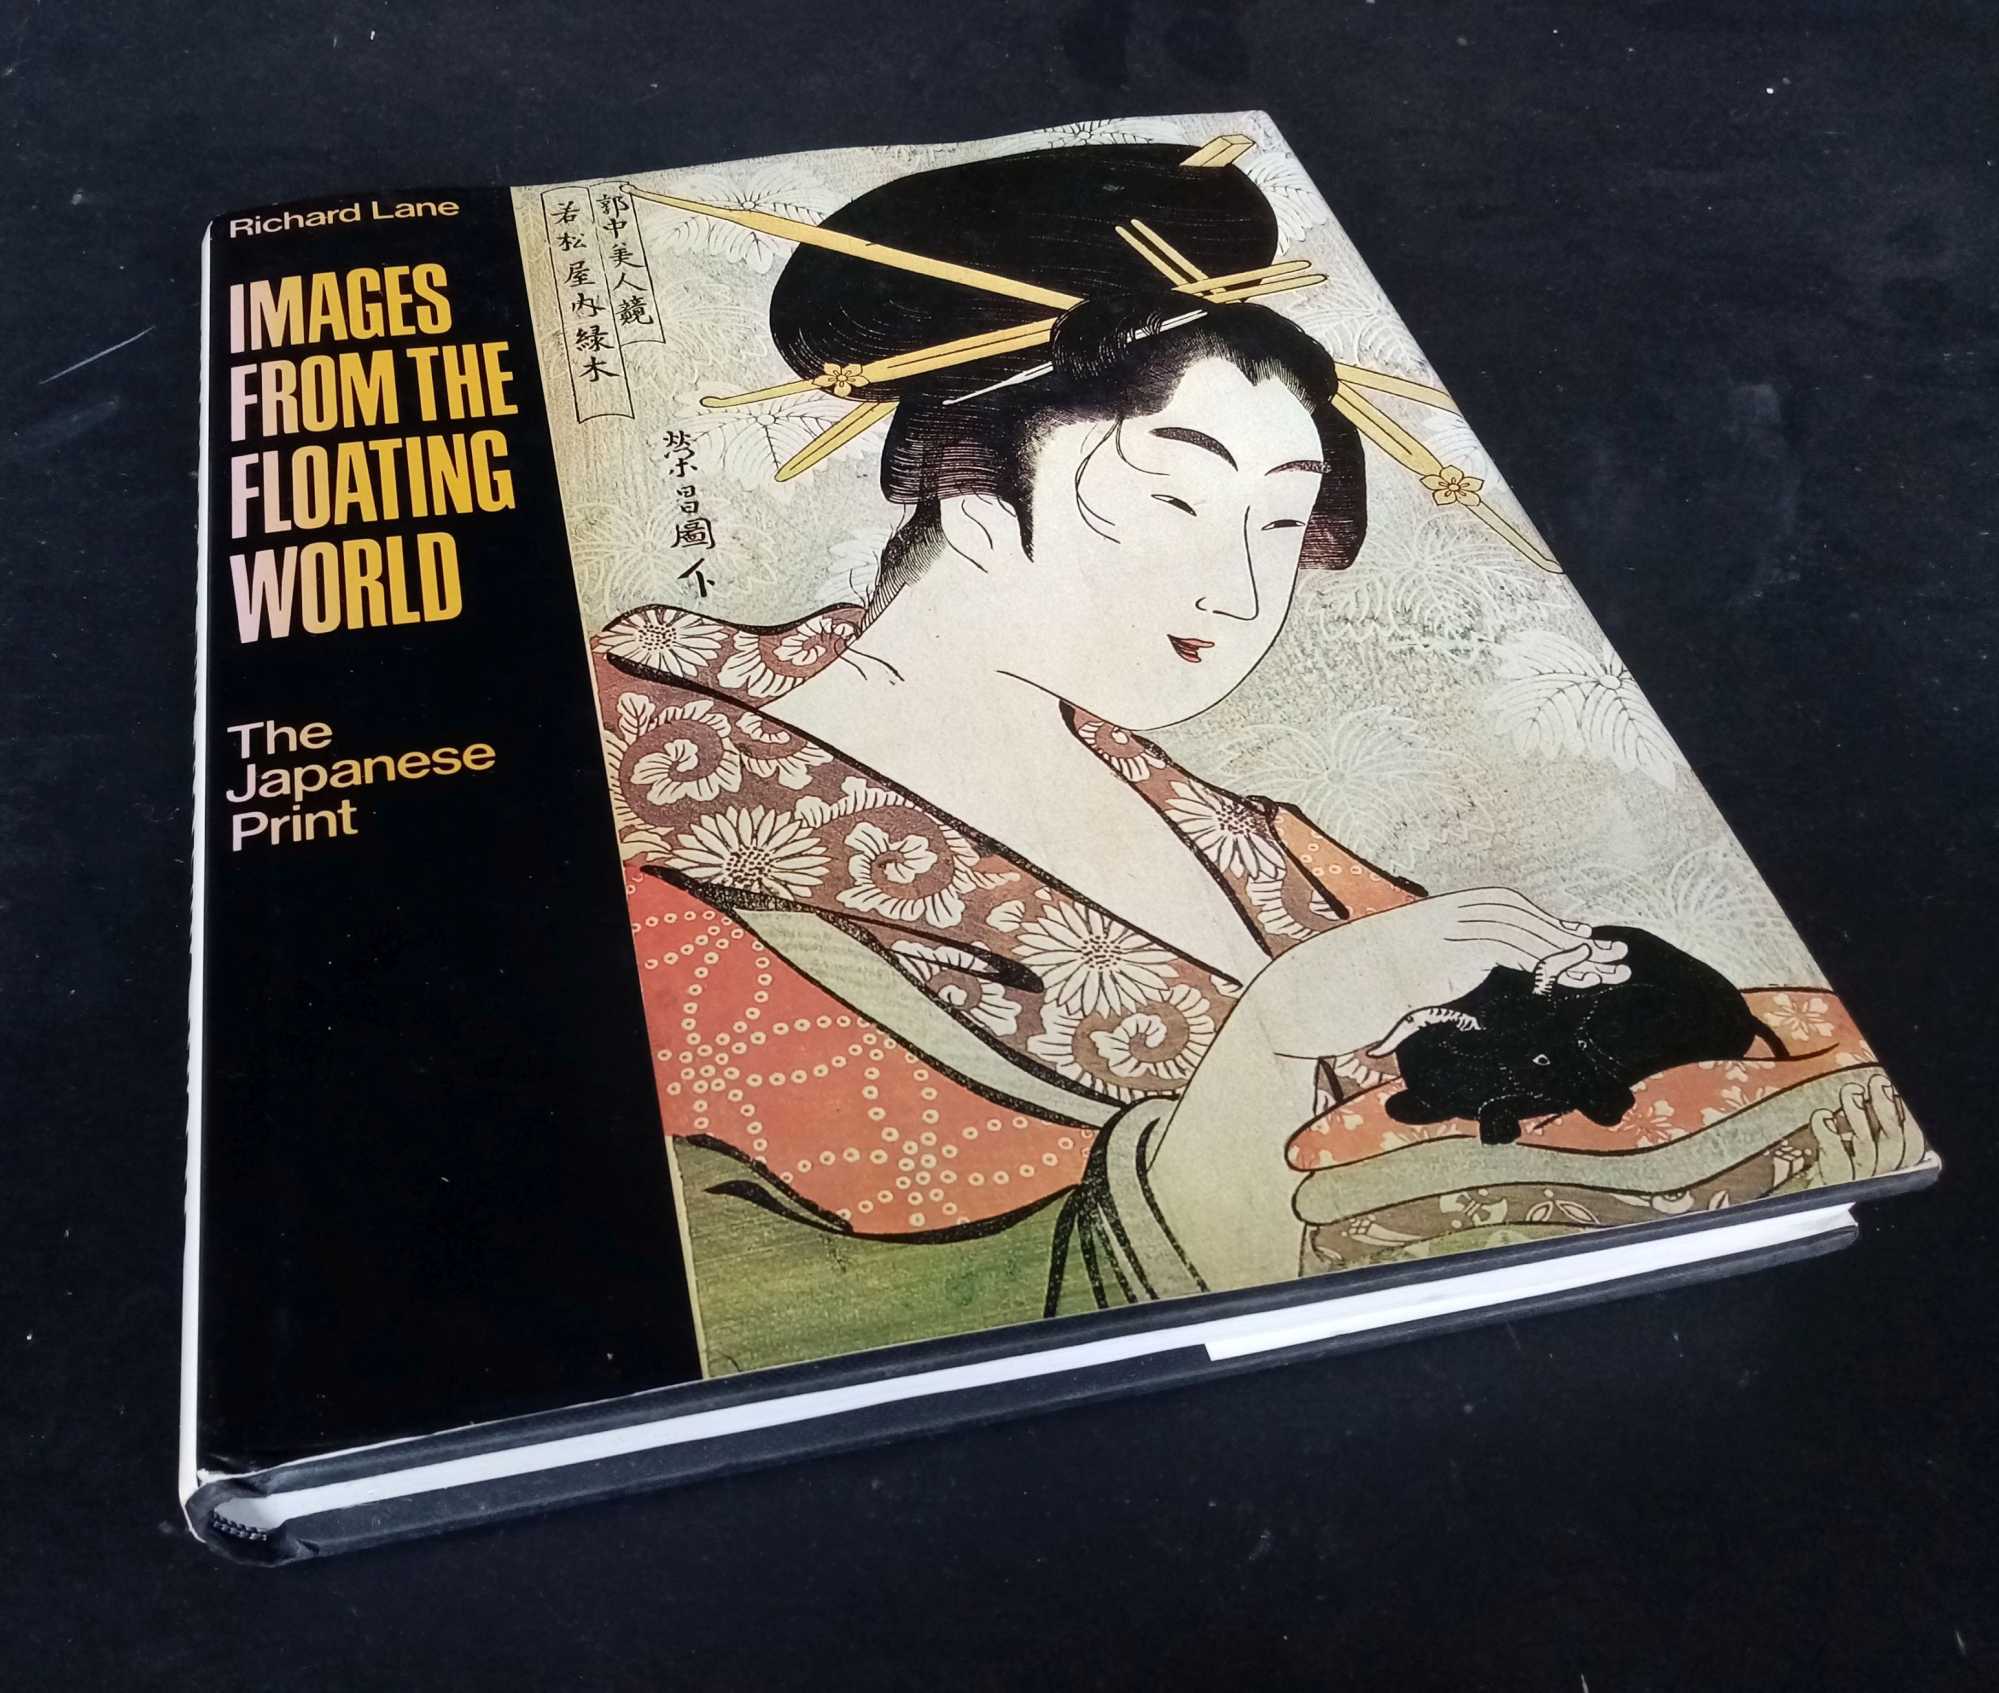 Richard Lane - Images from the Floating World: the Japanese Print, including an illustrated dictionary of Ukiyo-e